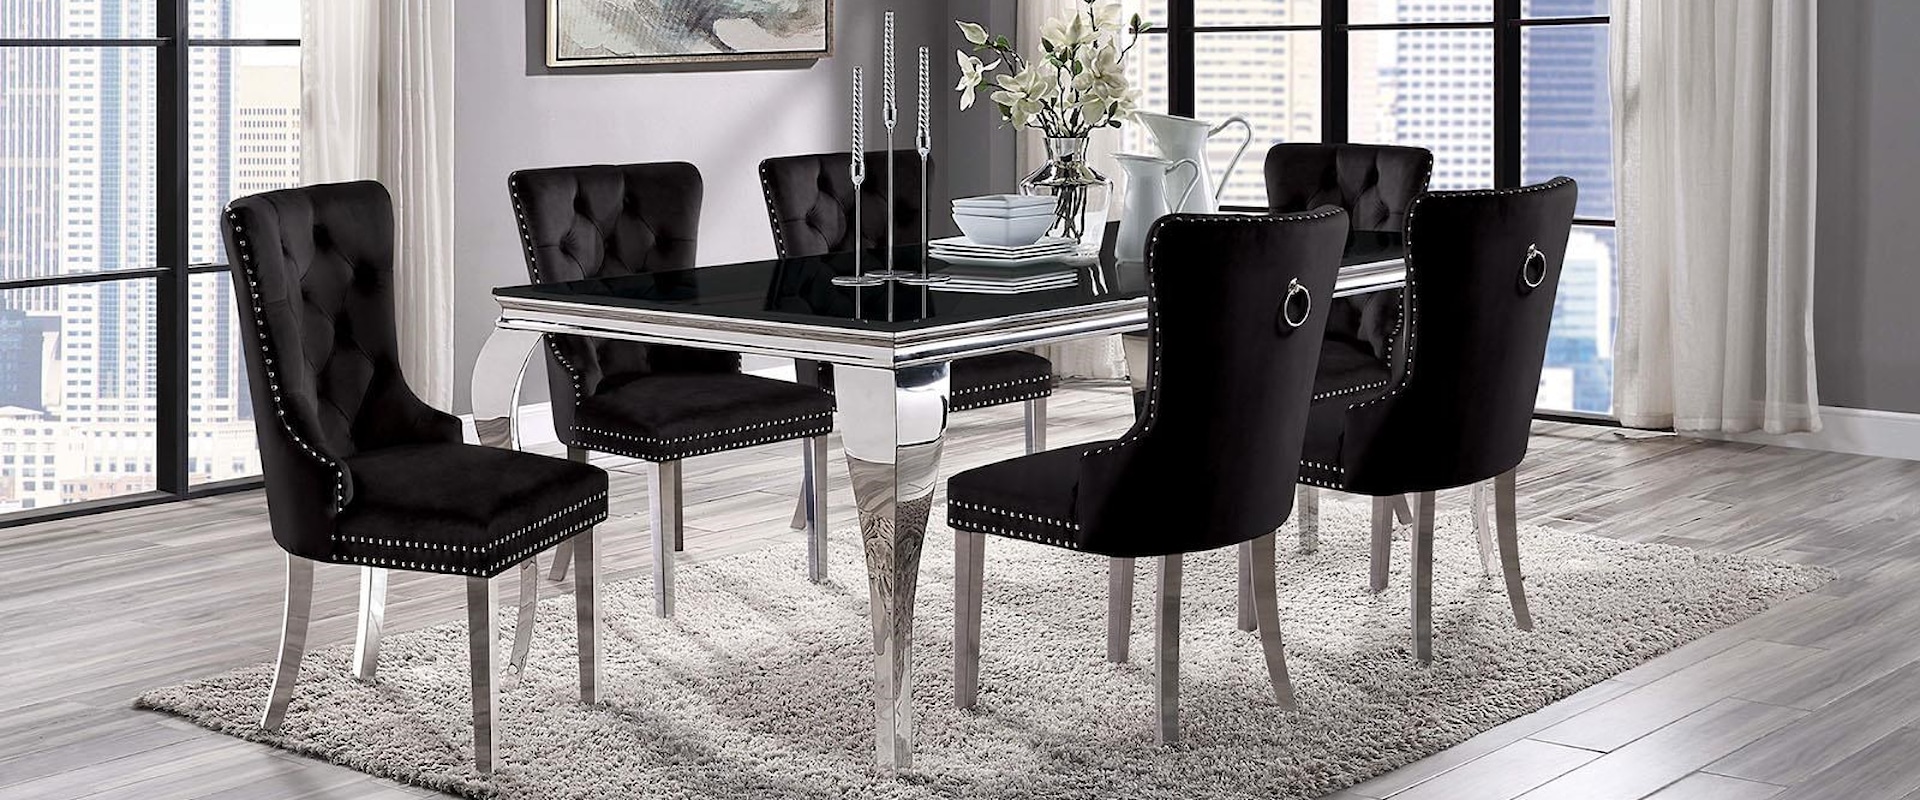 7 Pc. Dining Table Set, Black Chairs